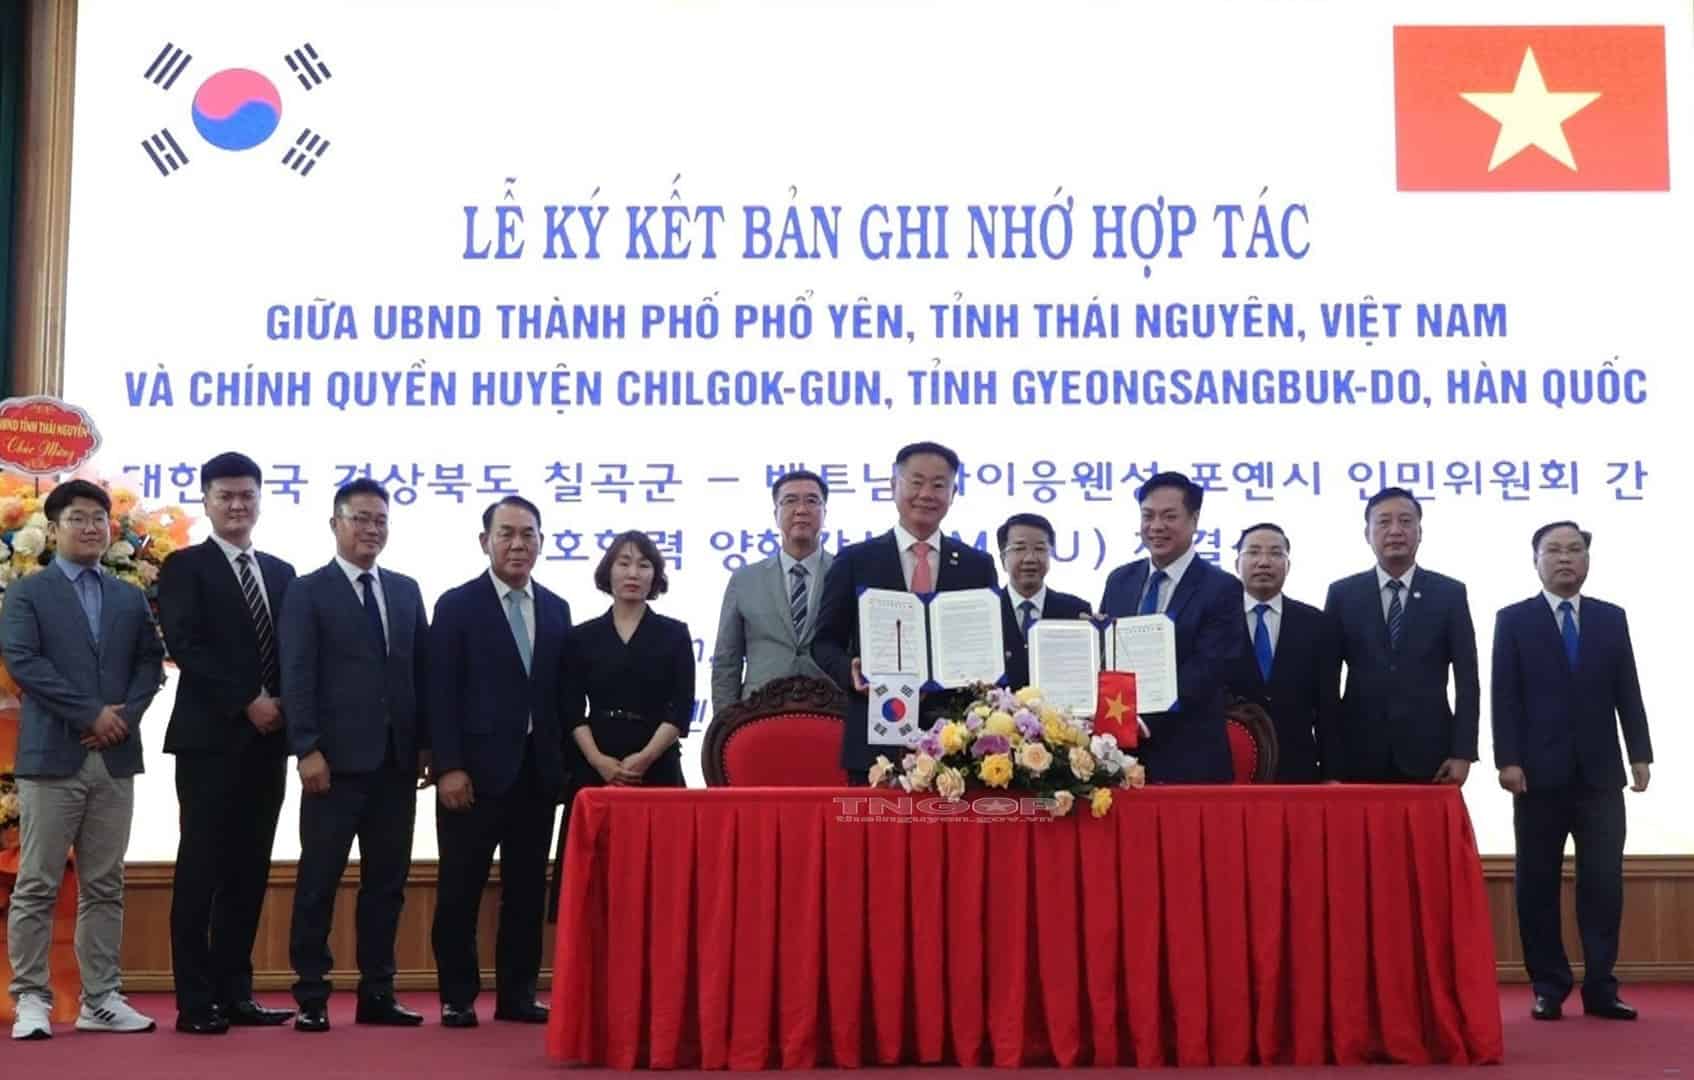 Signing Ceremony of the Memorandum of Understanding on Cooperation between the People's Committee of Pho Yen City and the government of Chilgok-Gun district, Gyeongsangbuk-do province, South Korea